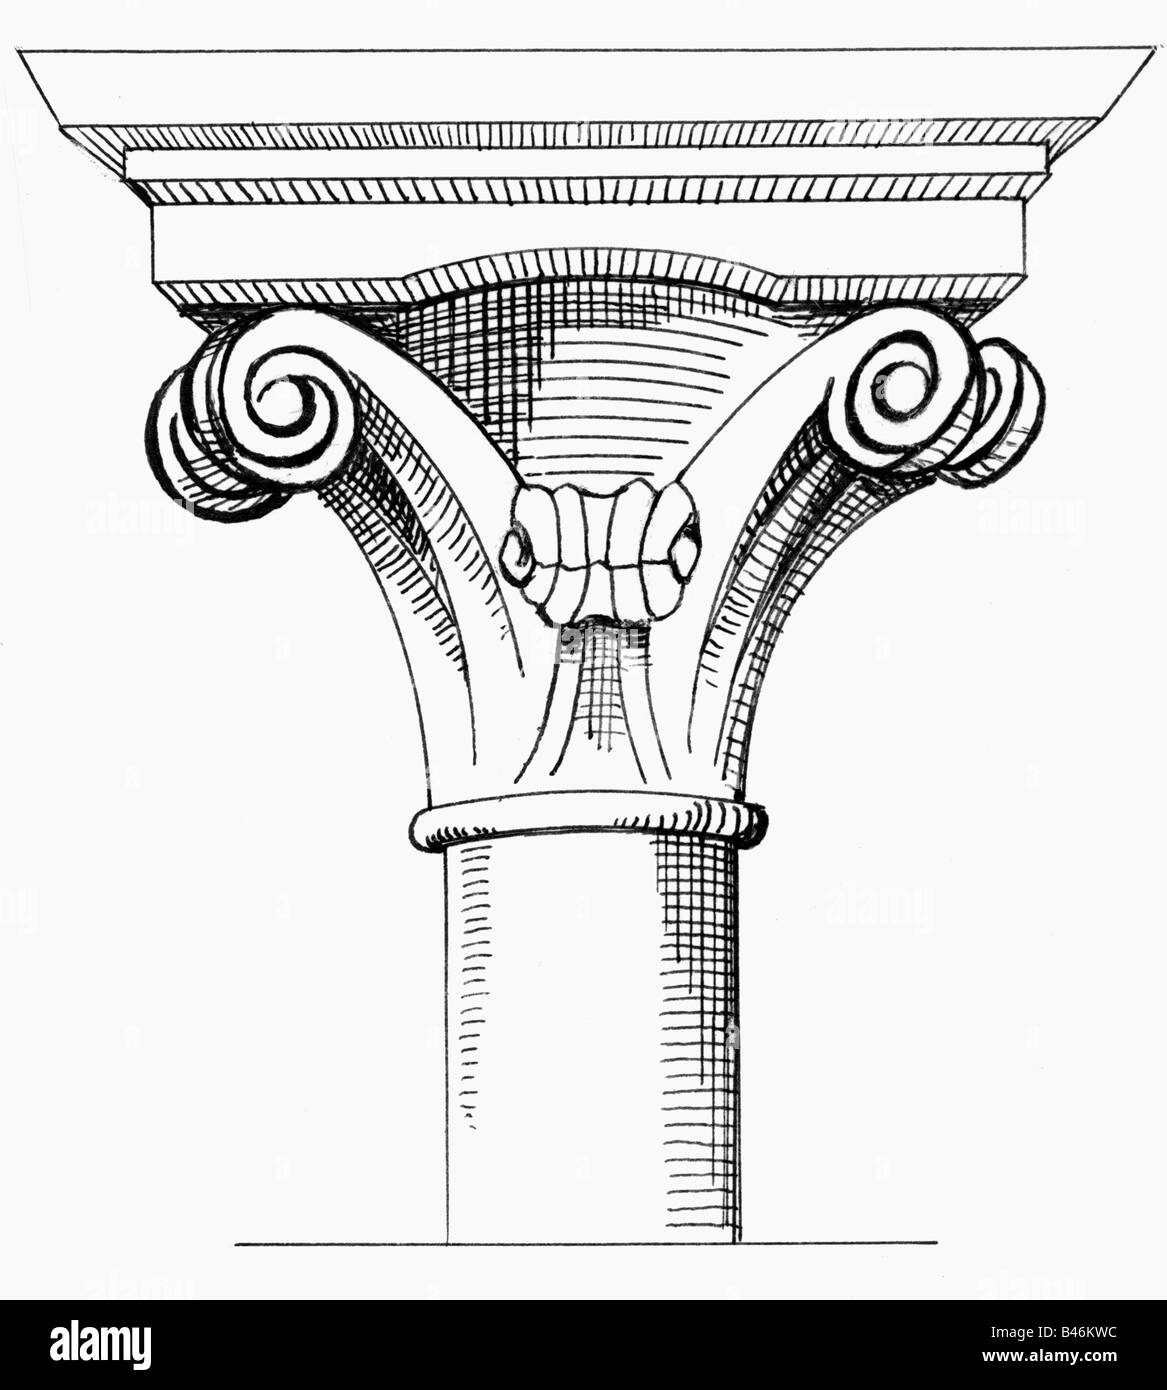 architecture, detail, columns, bud capitel, ink drawing, 20th century, middle ages, Gothic, column, historic, historical, medieval, Stock Photo